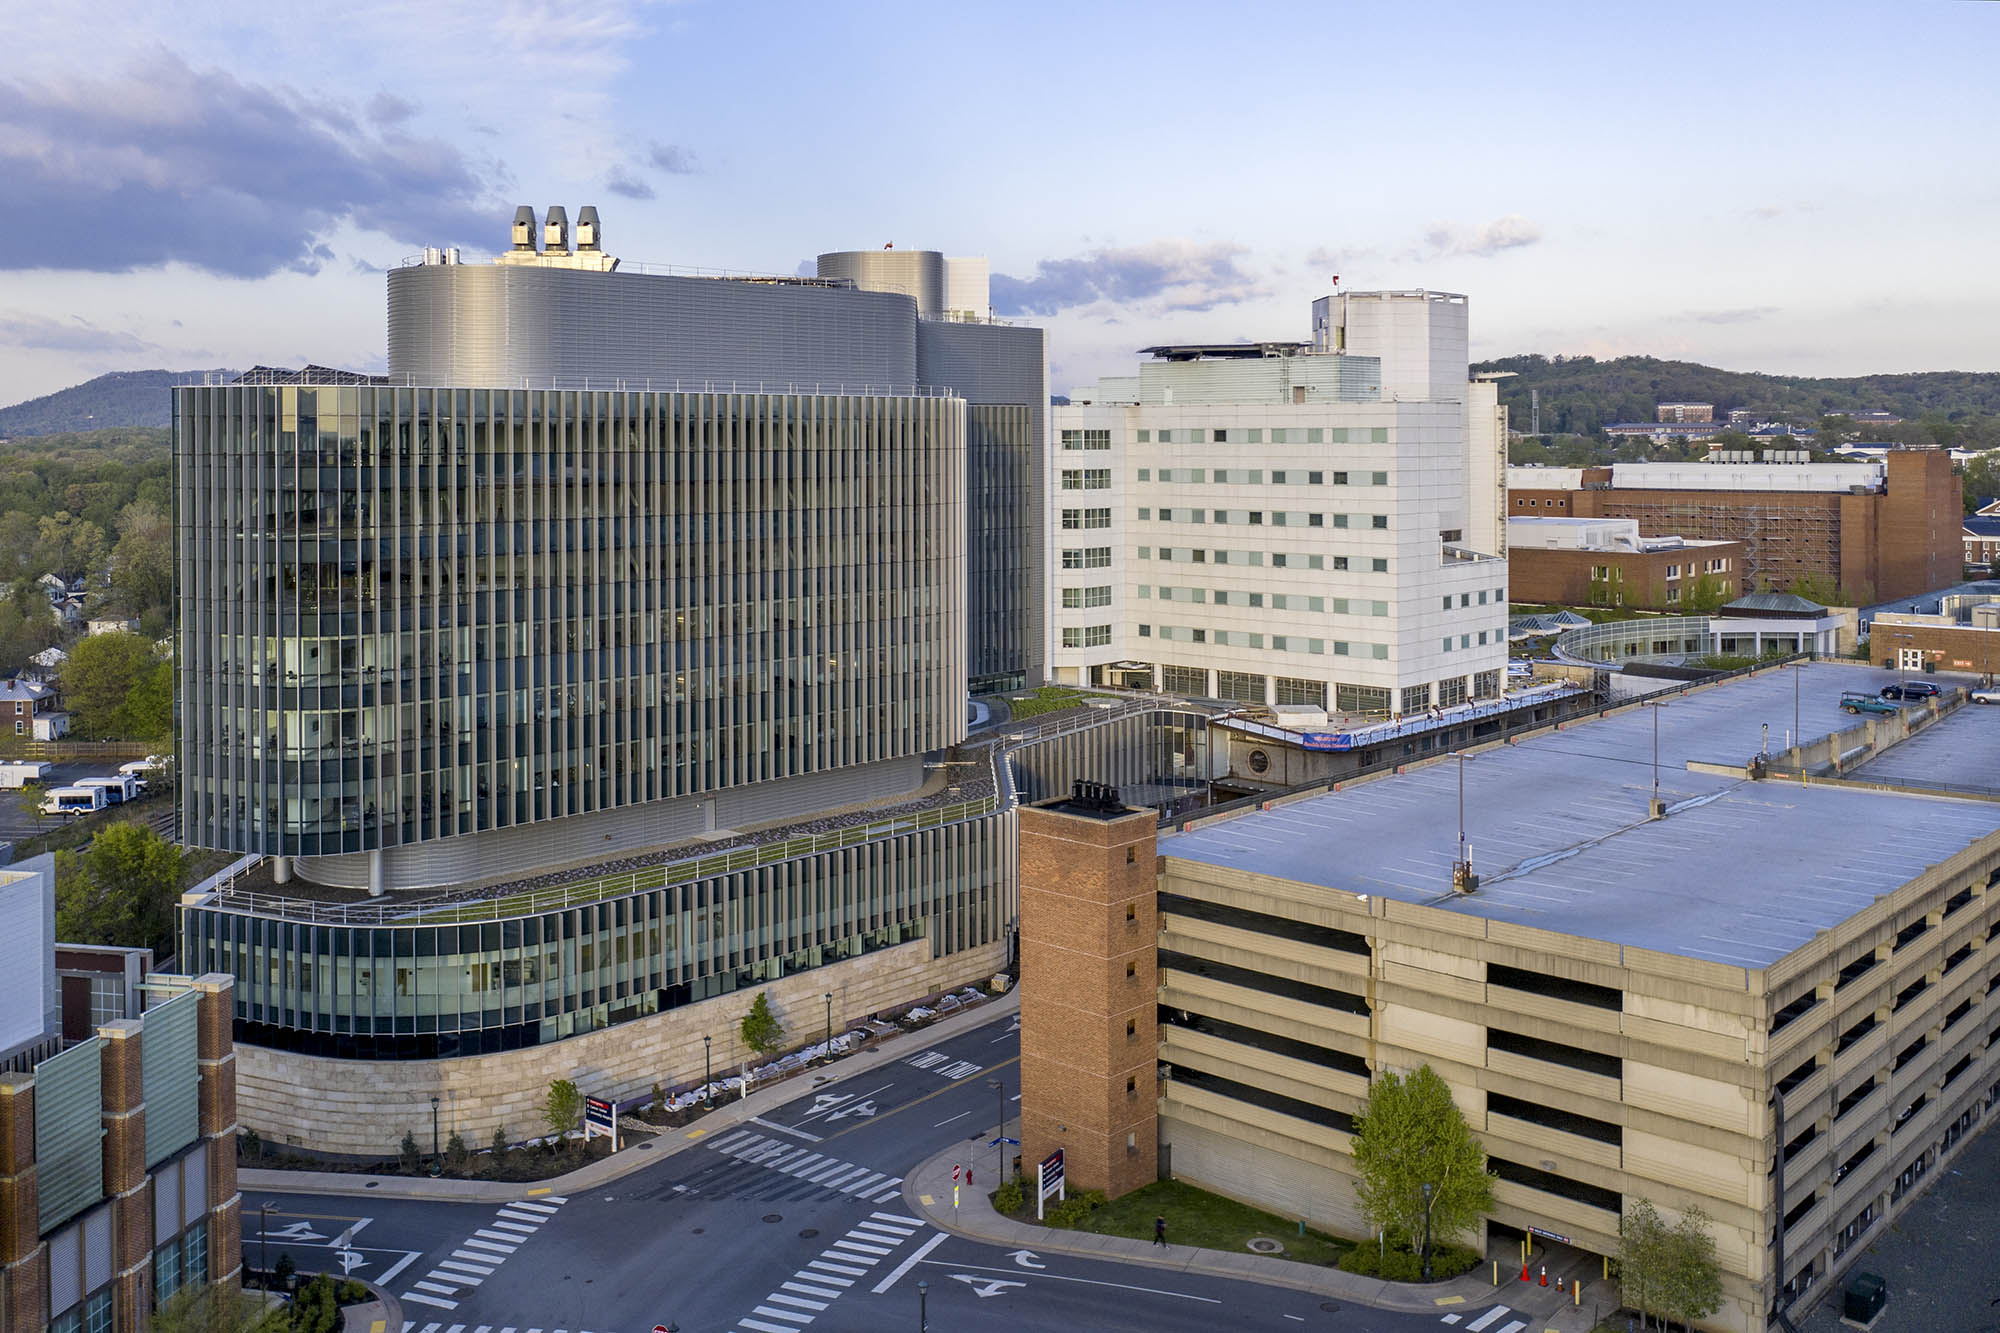 Aerial view of the UVA Health Center Buildings